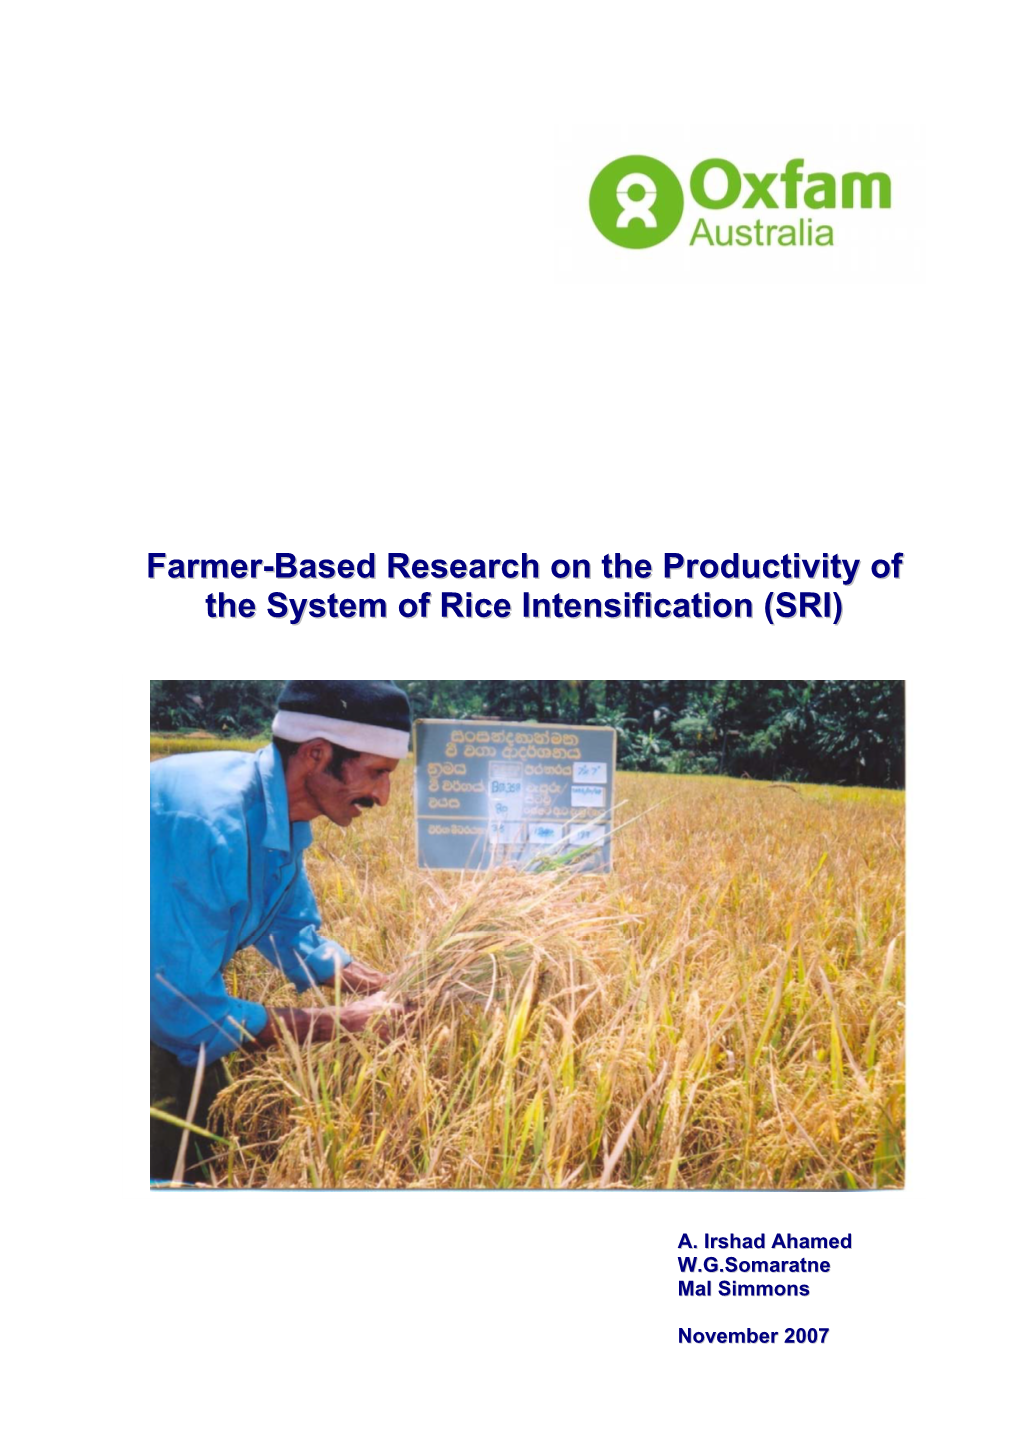 Farmer-Based Research on the Productivity of the System of Rice Intensification (SRI)